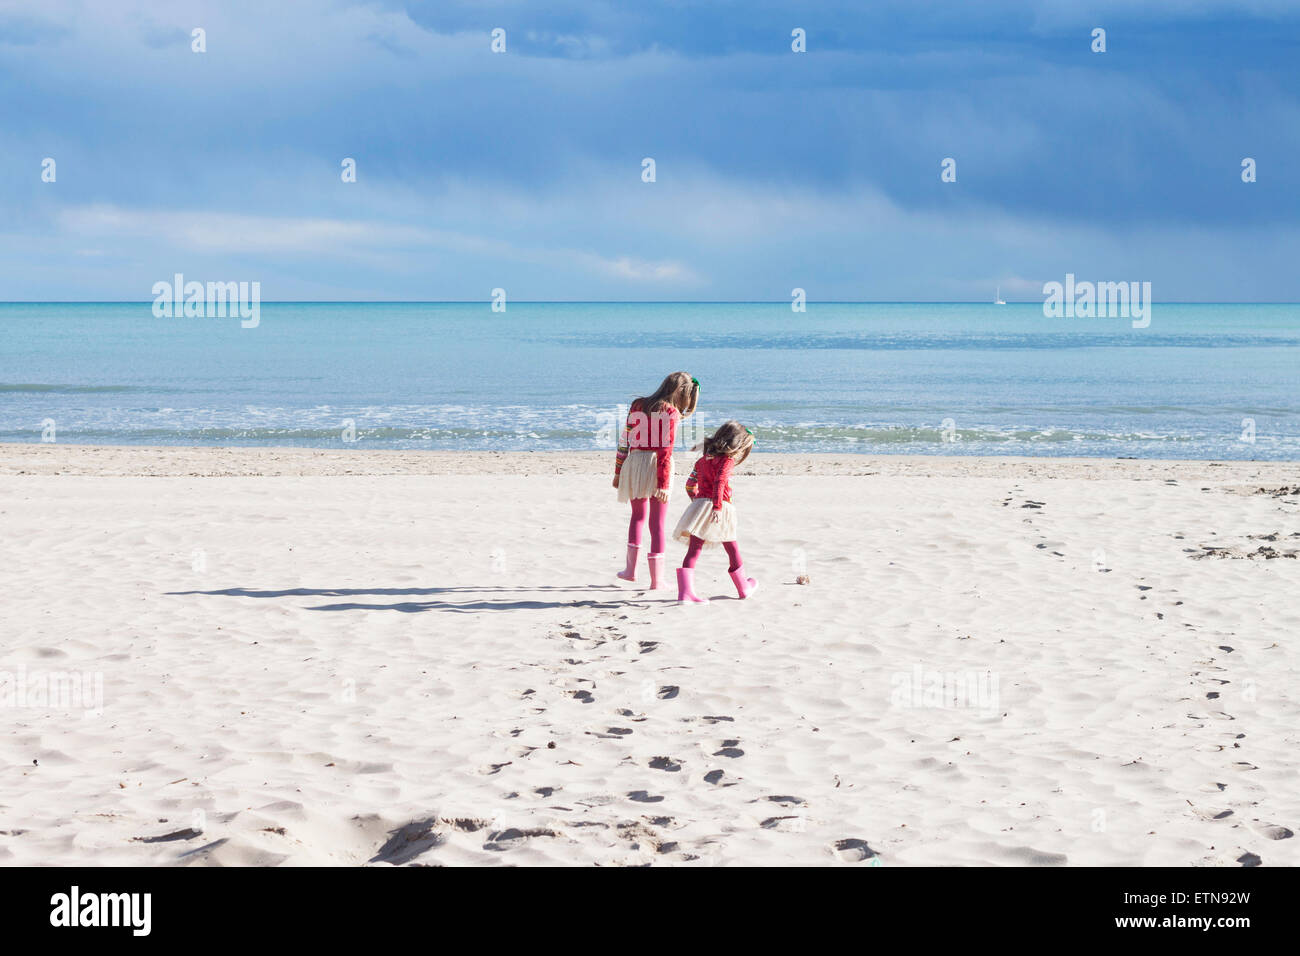 Rear view of two girls walking on the beach Stock Photo